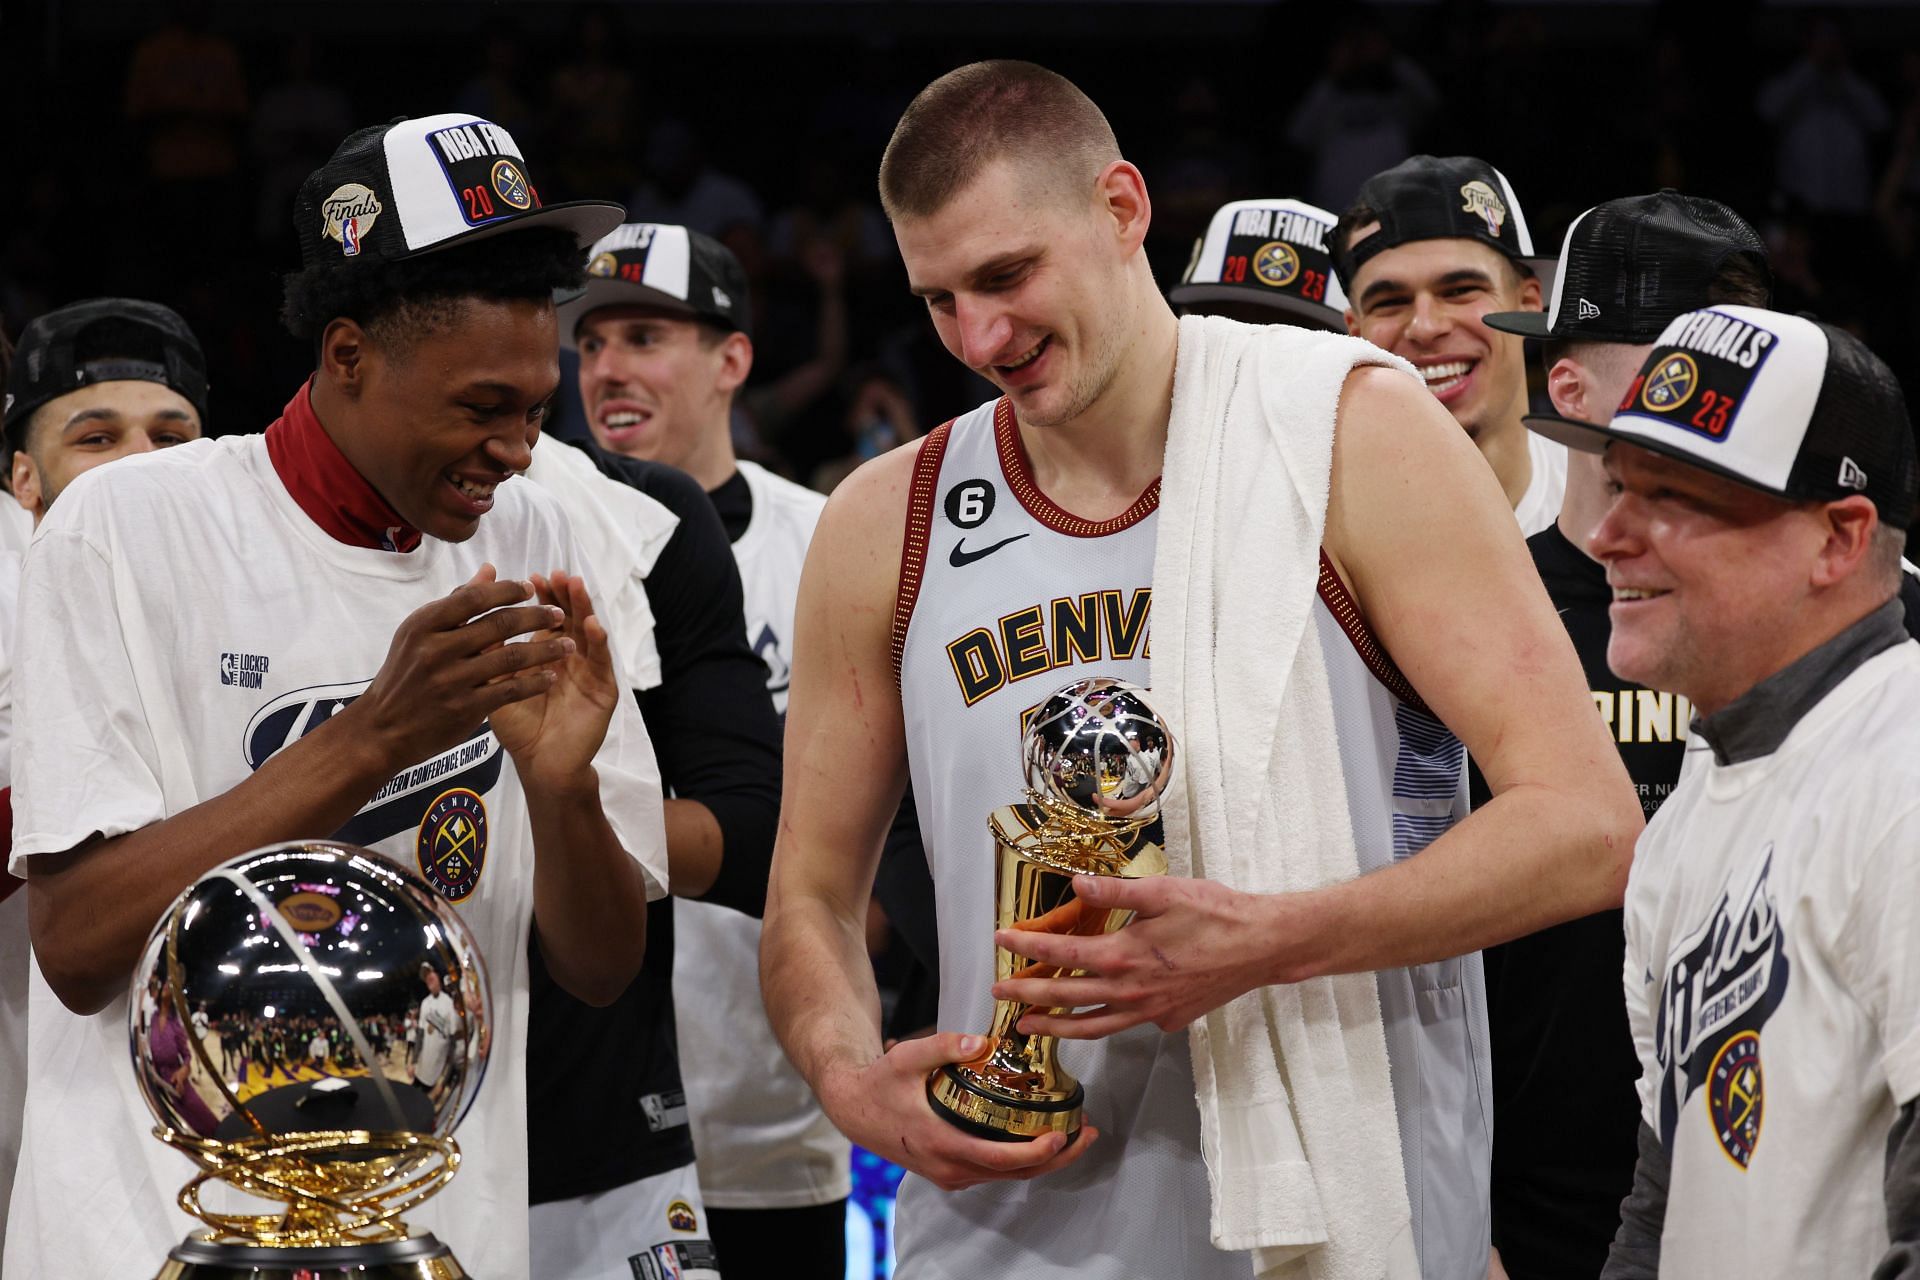 The NBA Cup ensures there are more trophies available for individual honors.